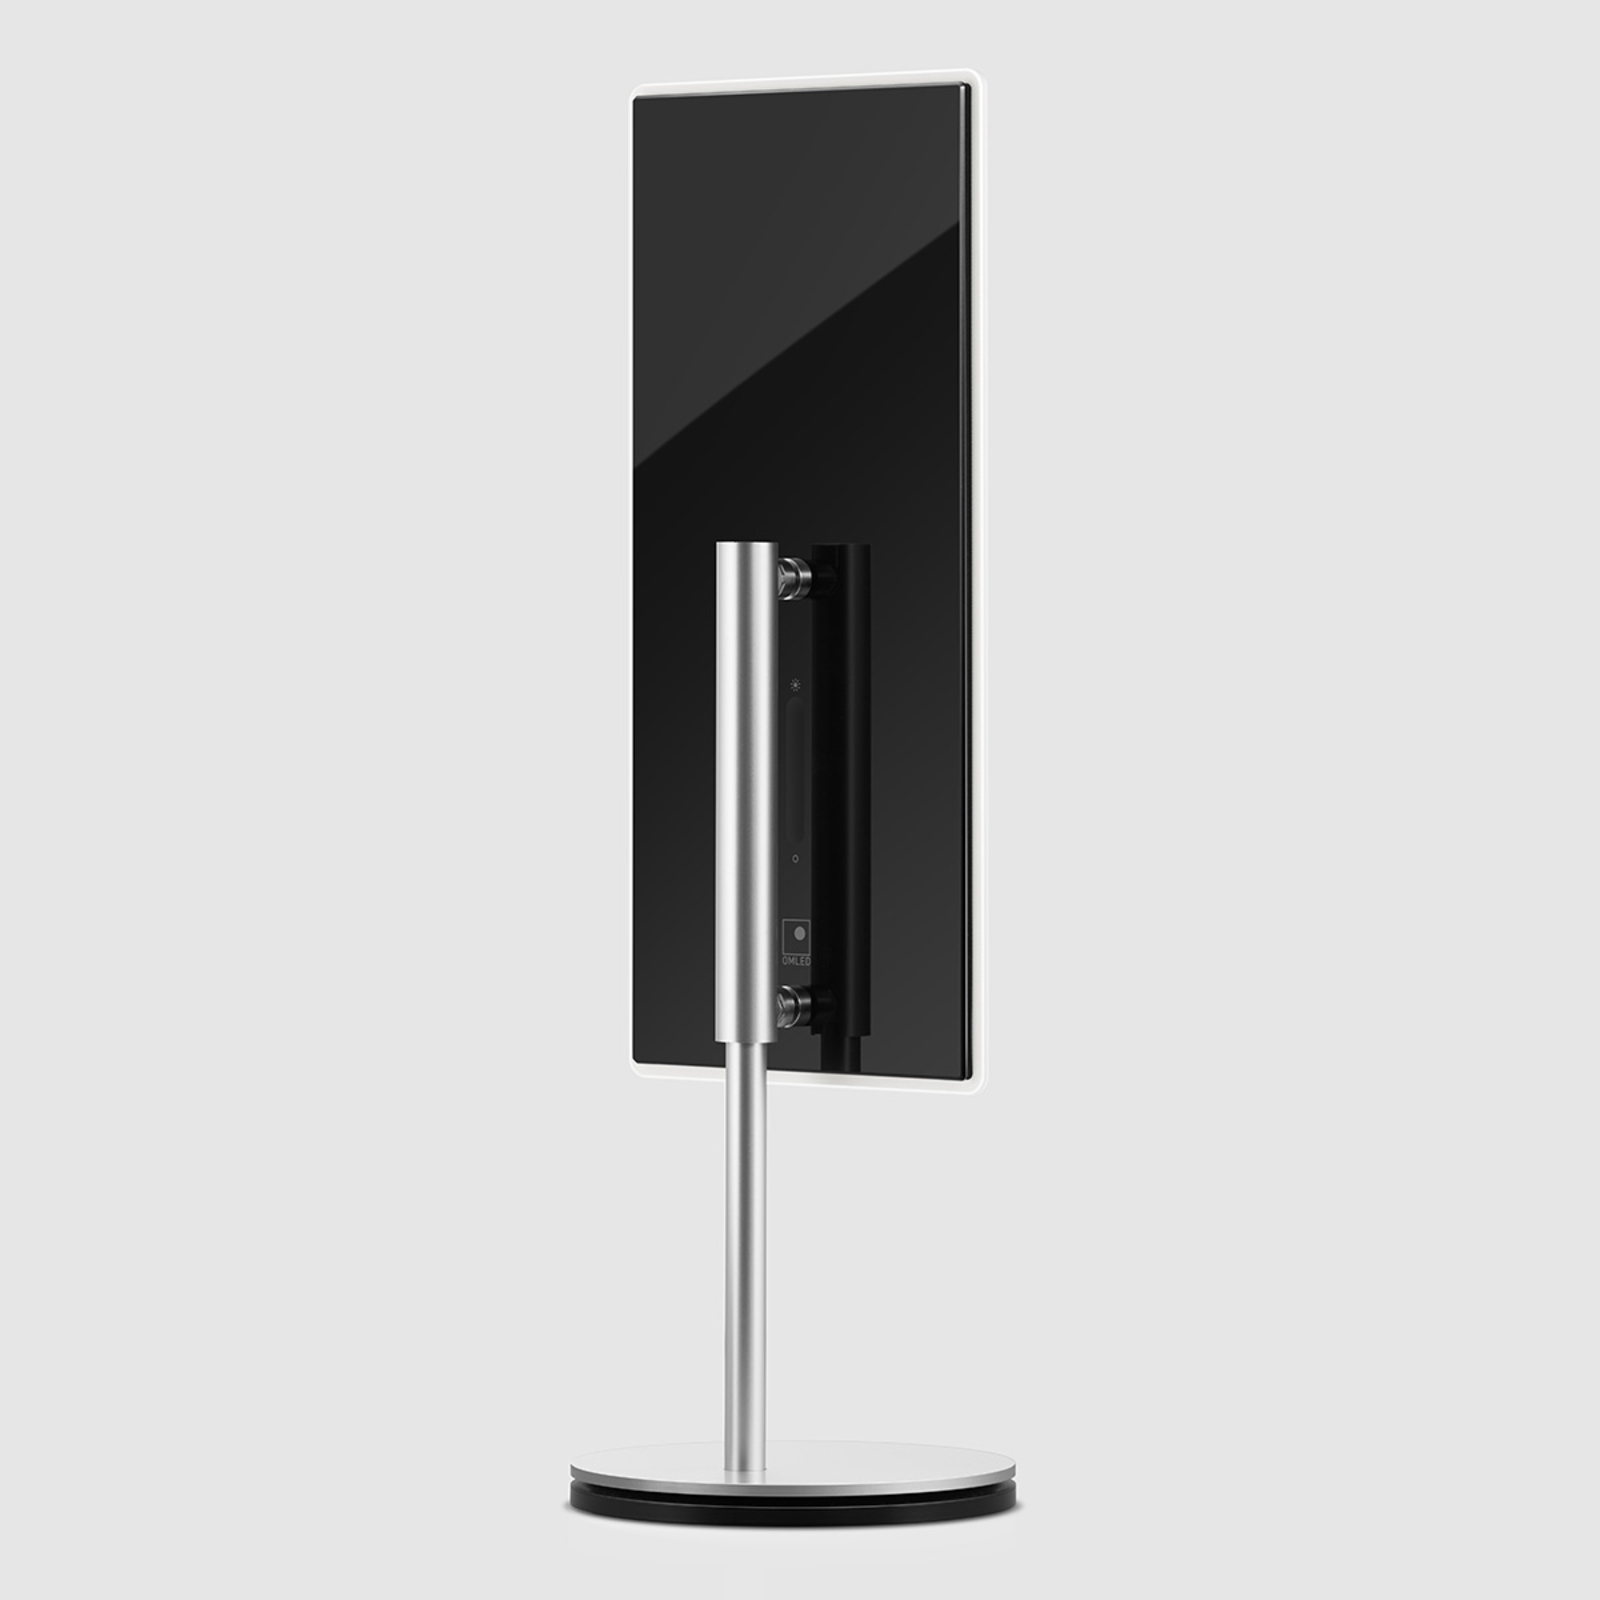 47.8 cm tall OLED table lamp OMLED One t2, black